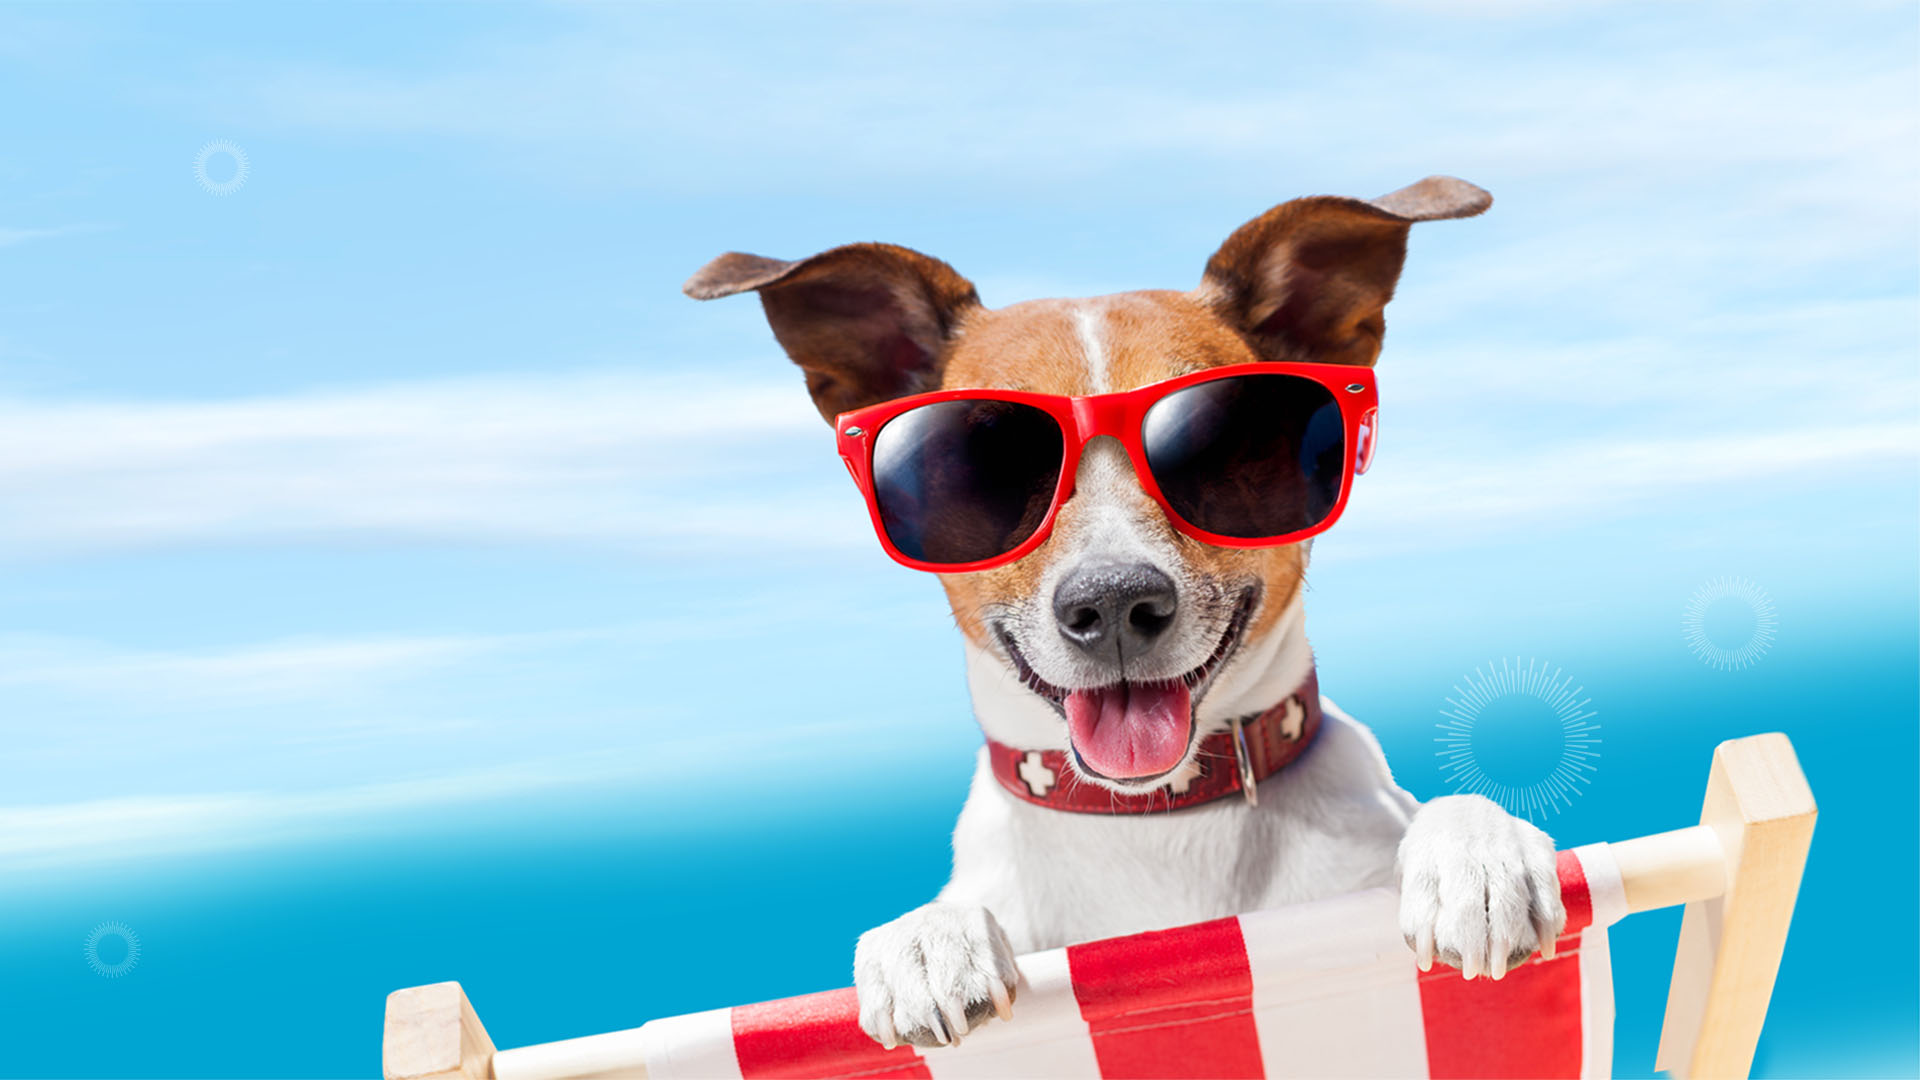 A cute dog with tongue out and wearing red sunglasses sits in a beach chair in front of a blue sky background